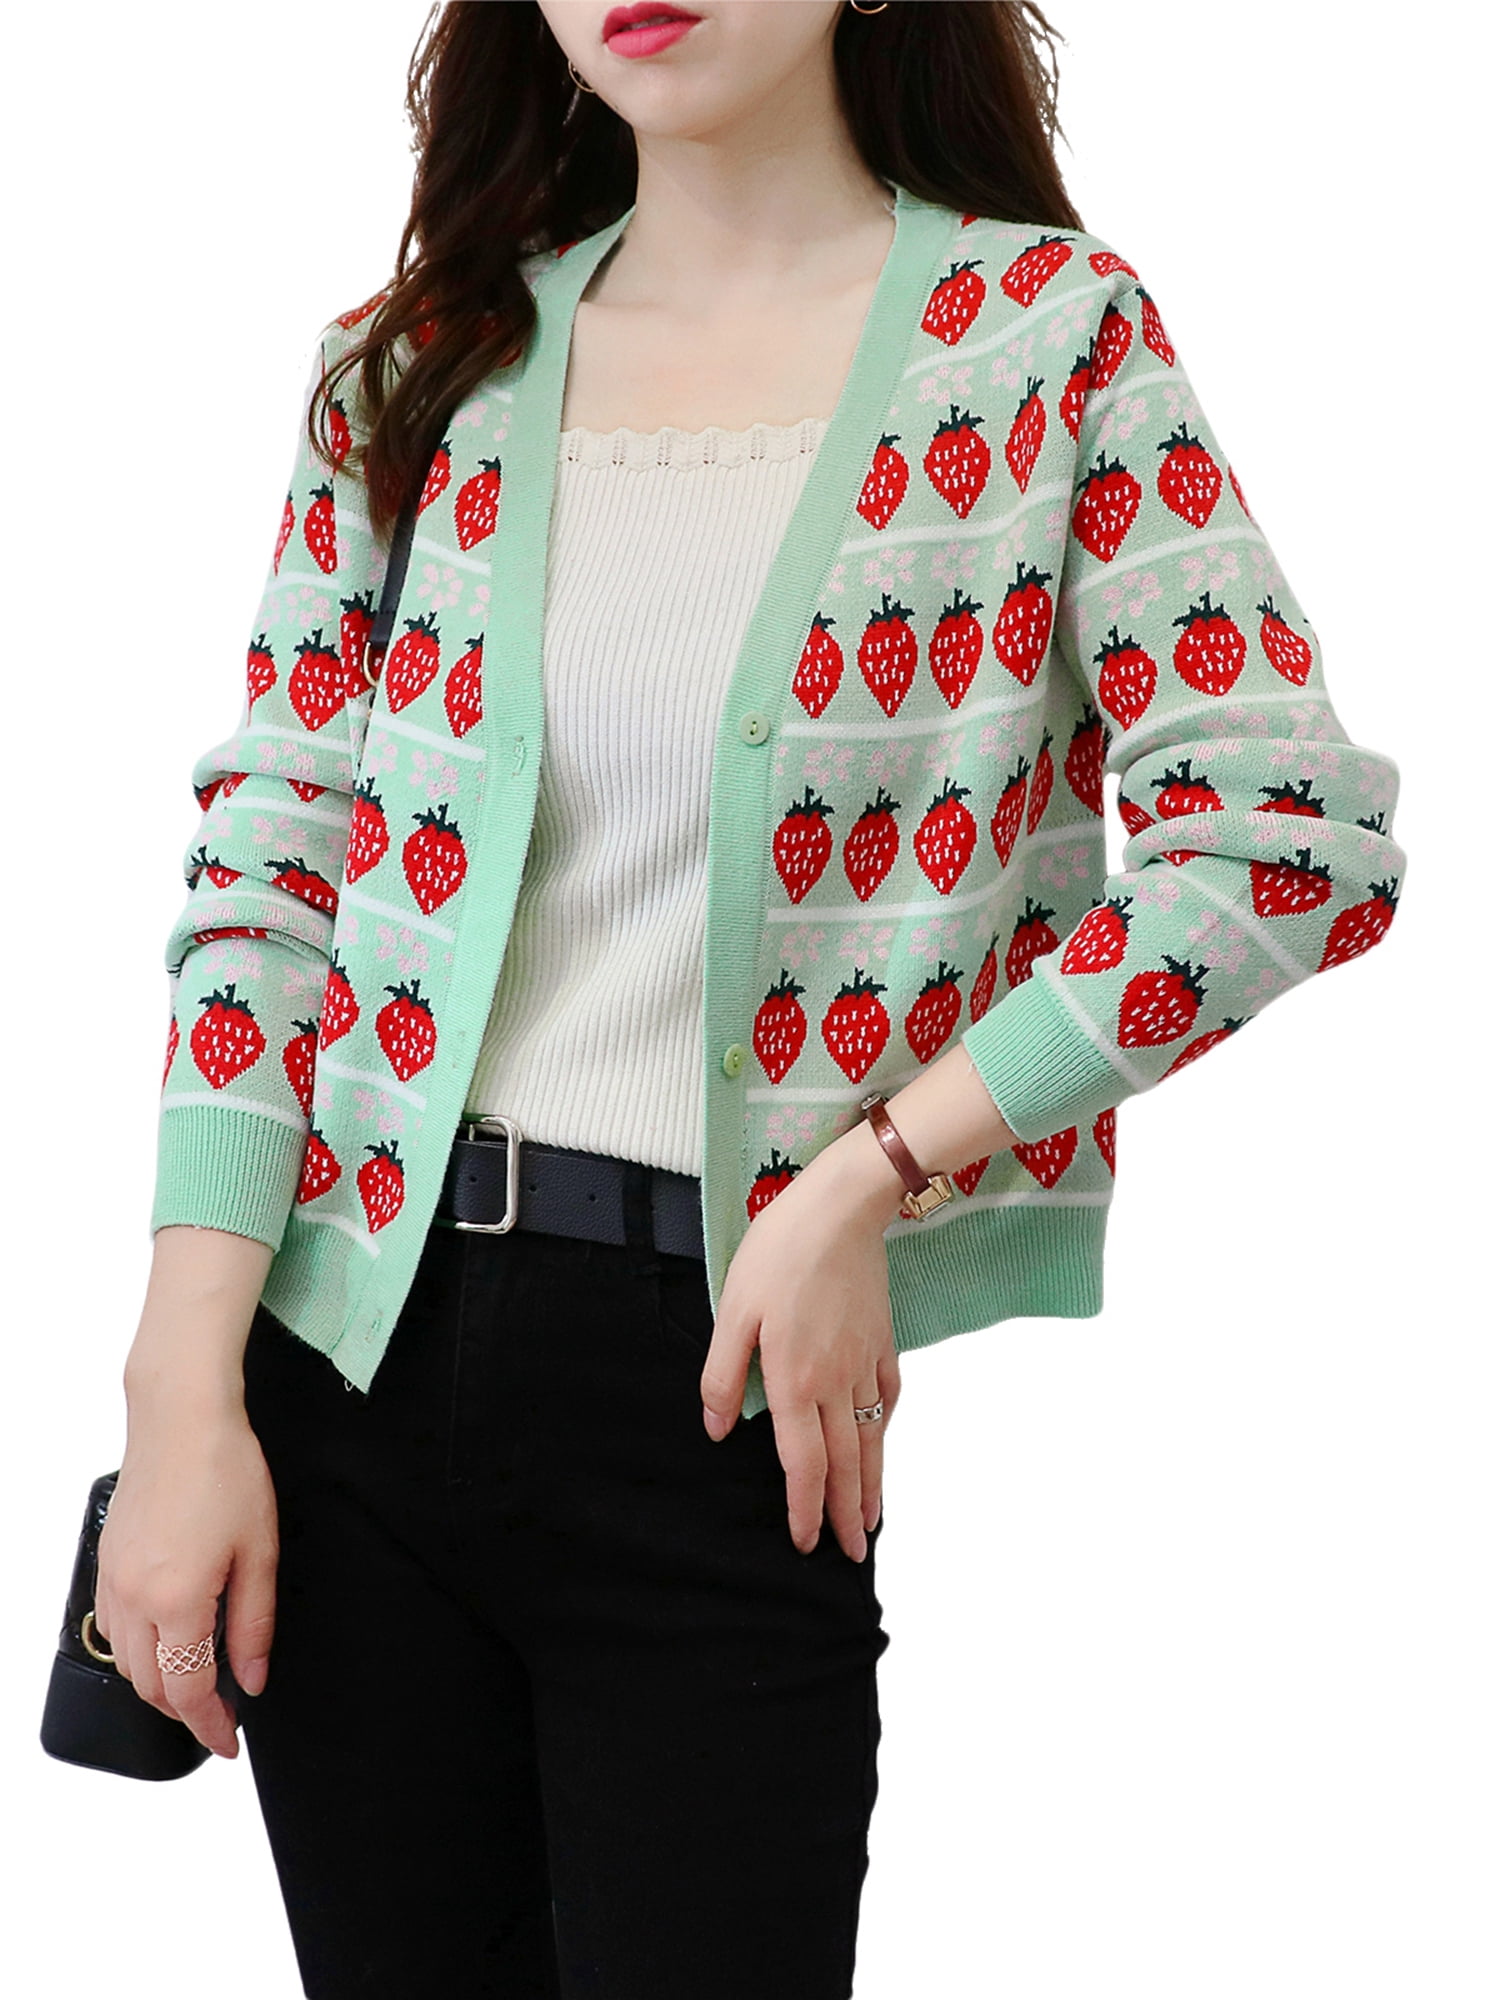 Women's Long Sleeve Knit Sweater Embroidered Strawberry Print Turtleneck Sweater Knit Pullovers